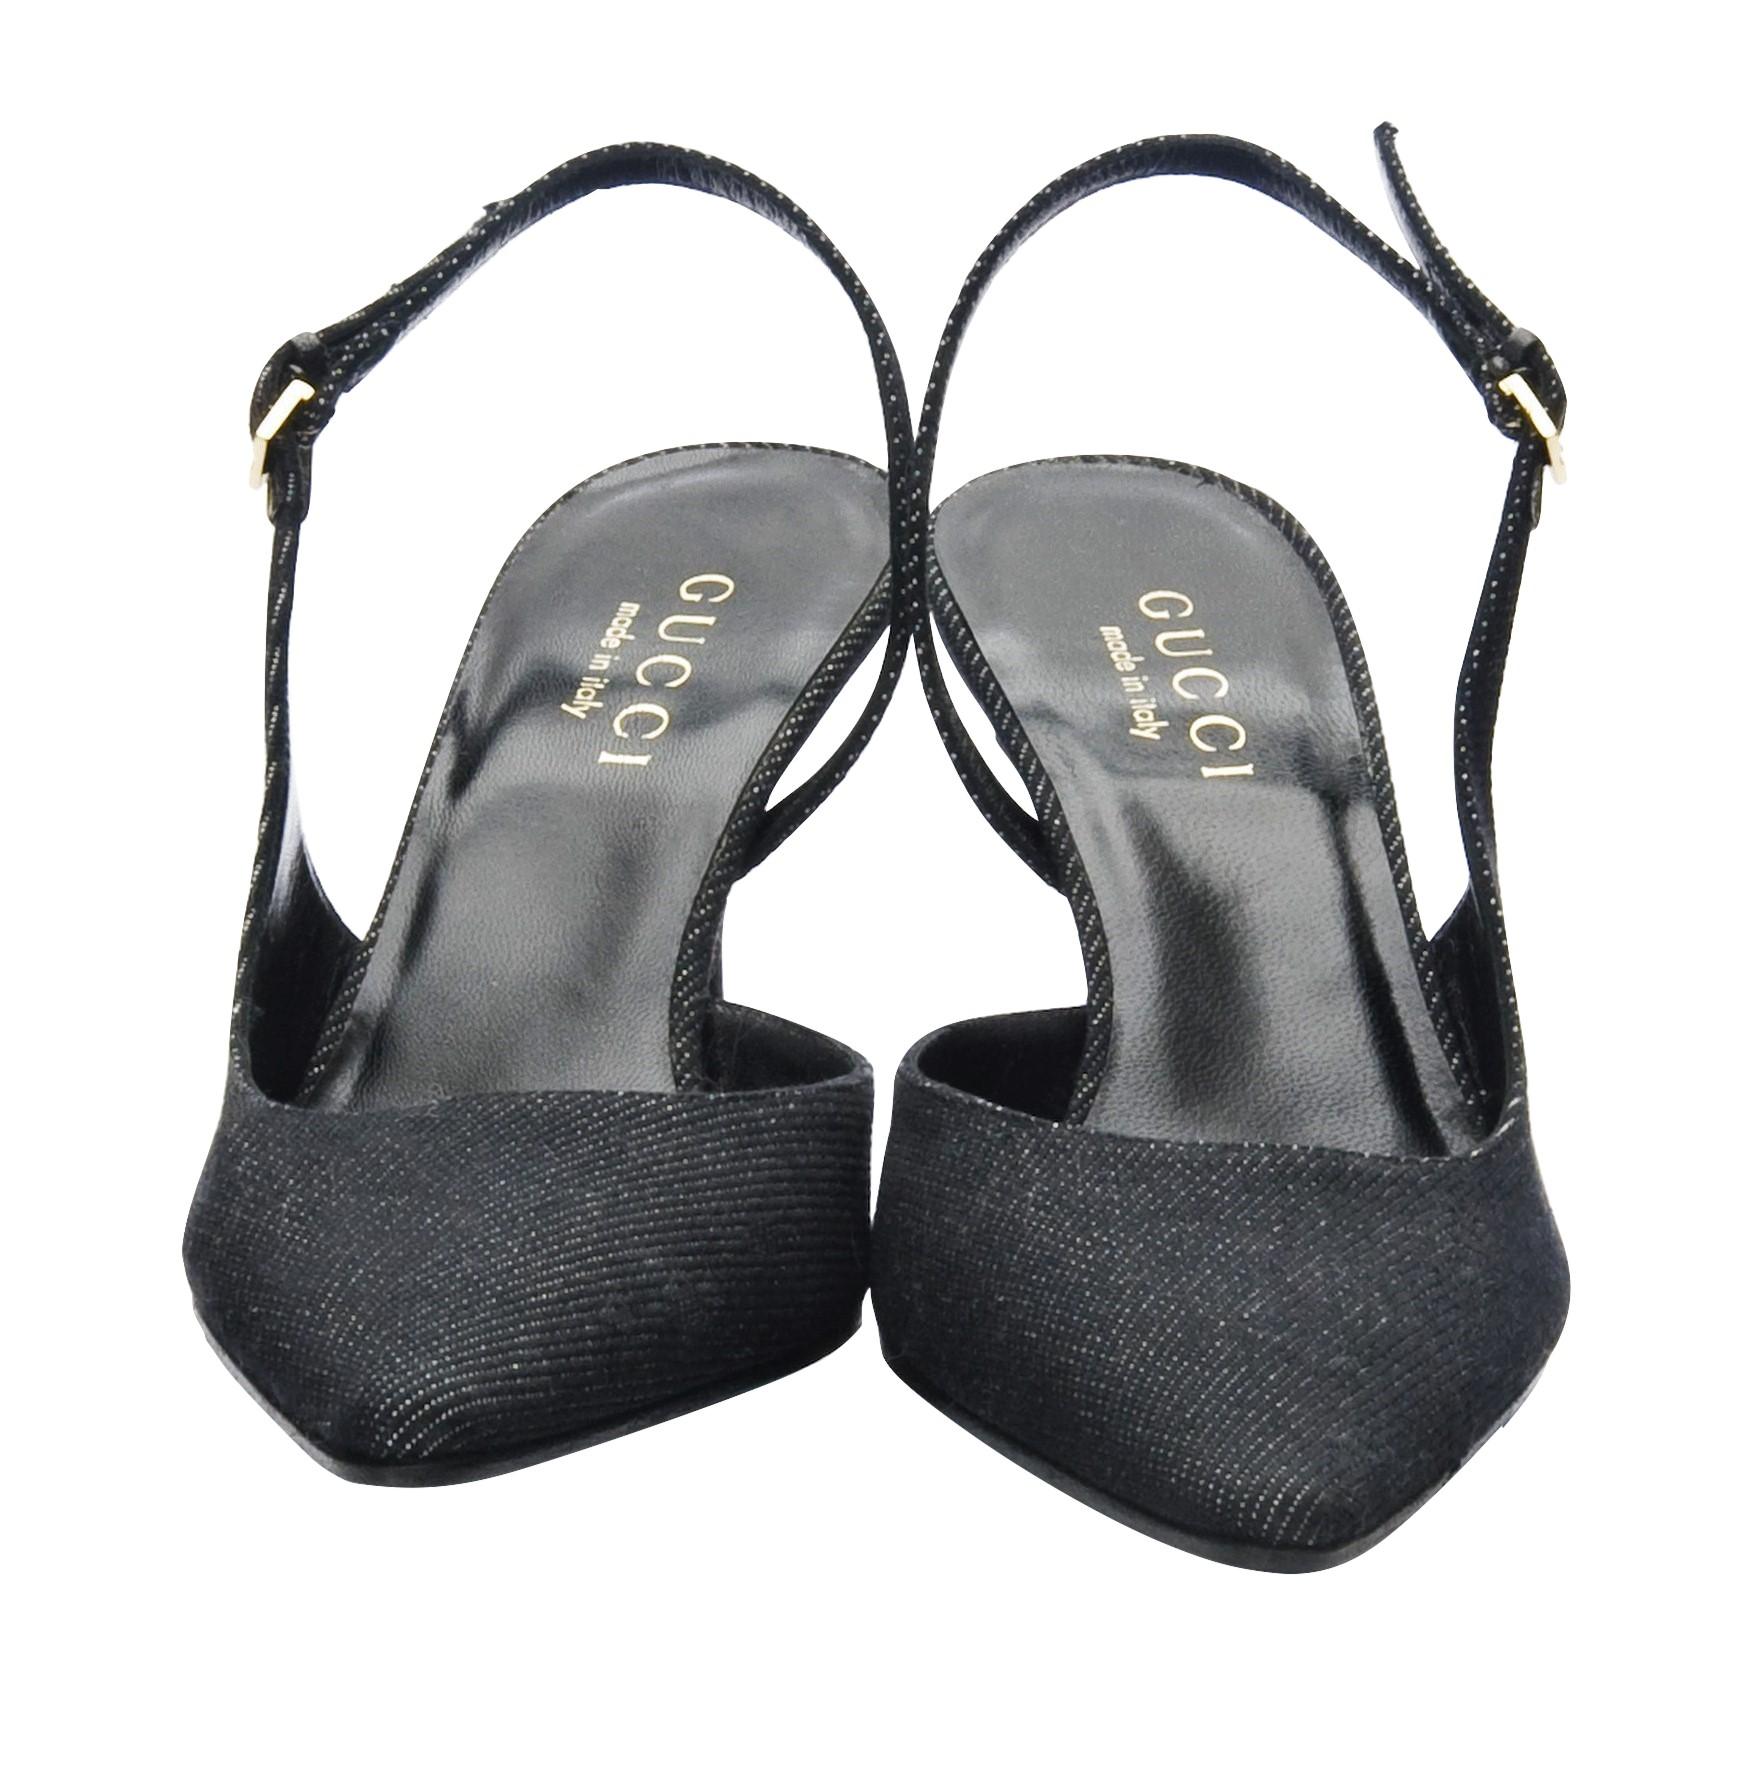 New Tom Ford for Gucci Cruise 2003 Black Slingback Heels Pumps Sz 36.5 ...